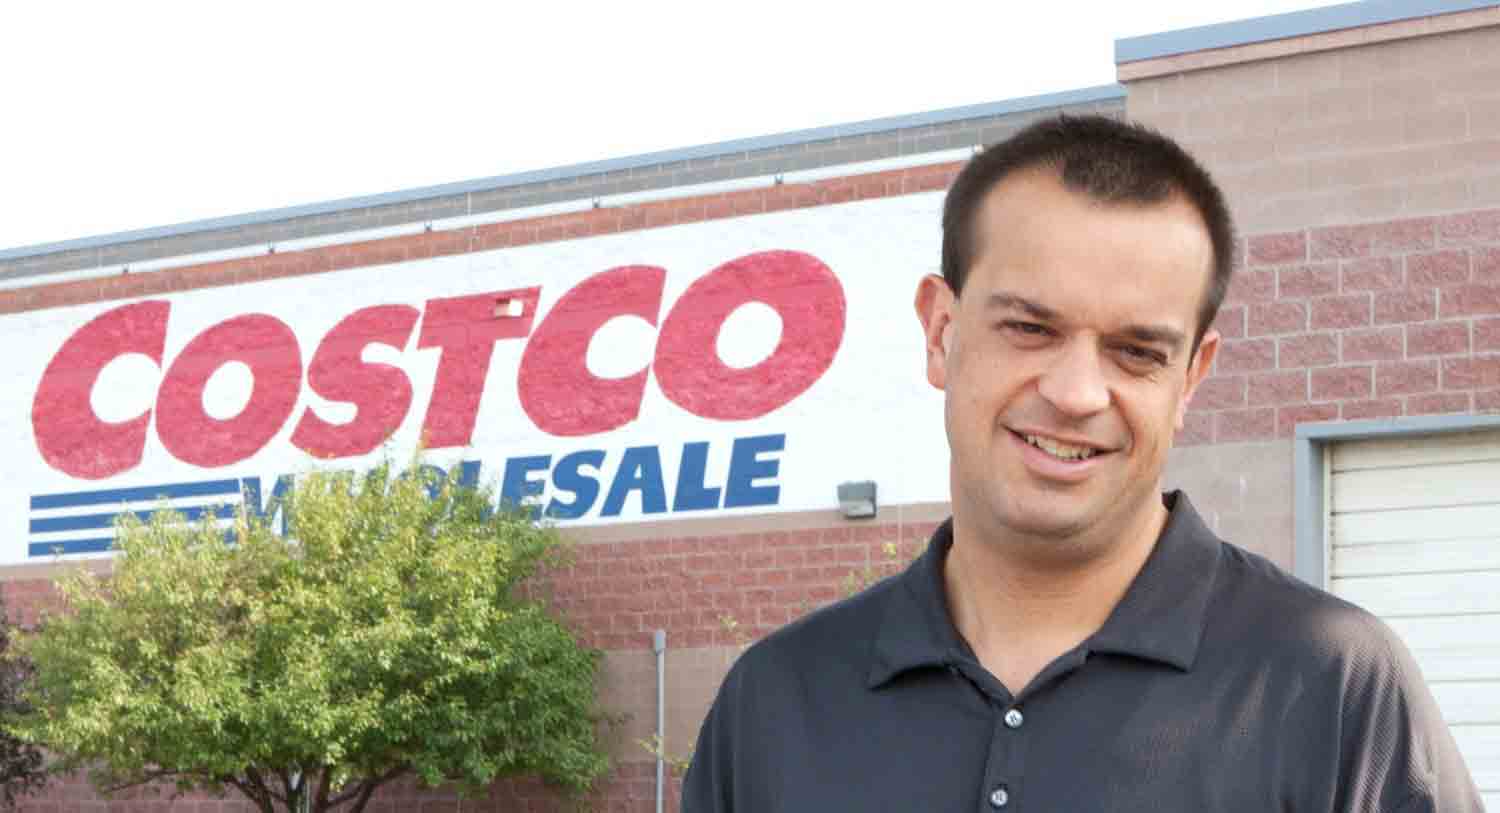 An Open Letter to the President and CEO of Costco